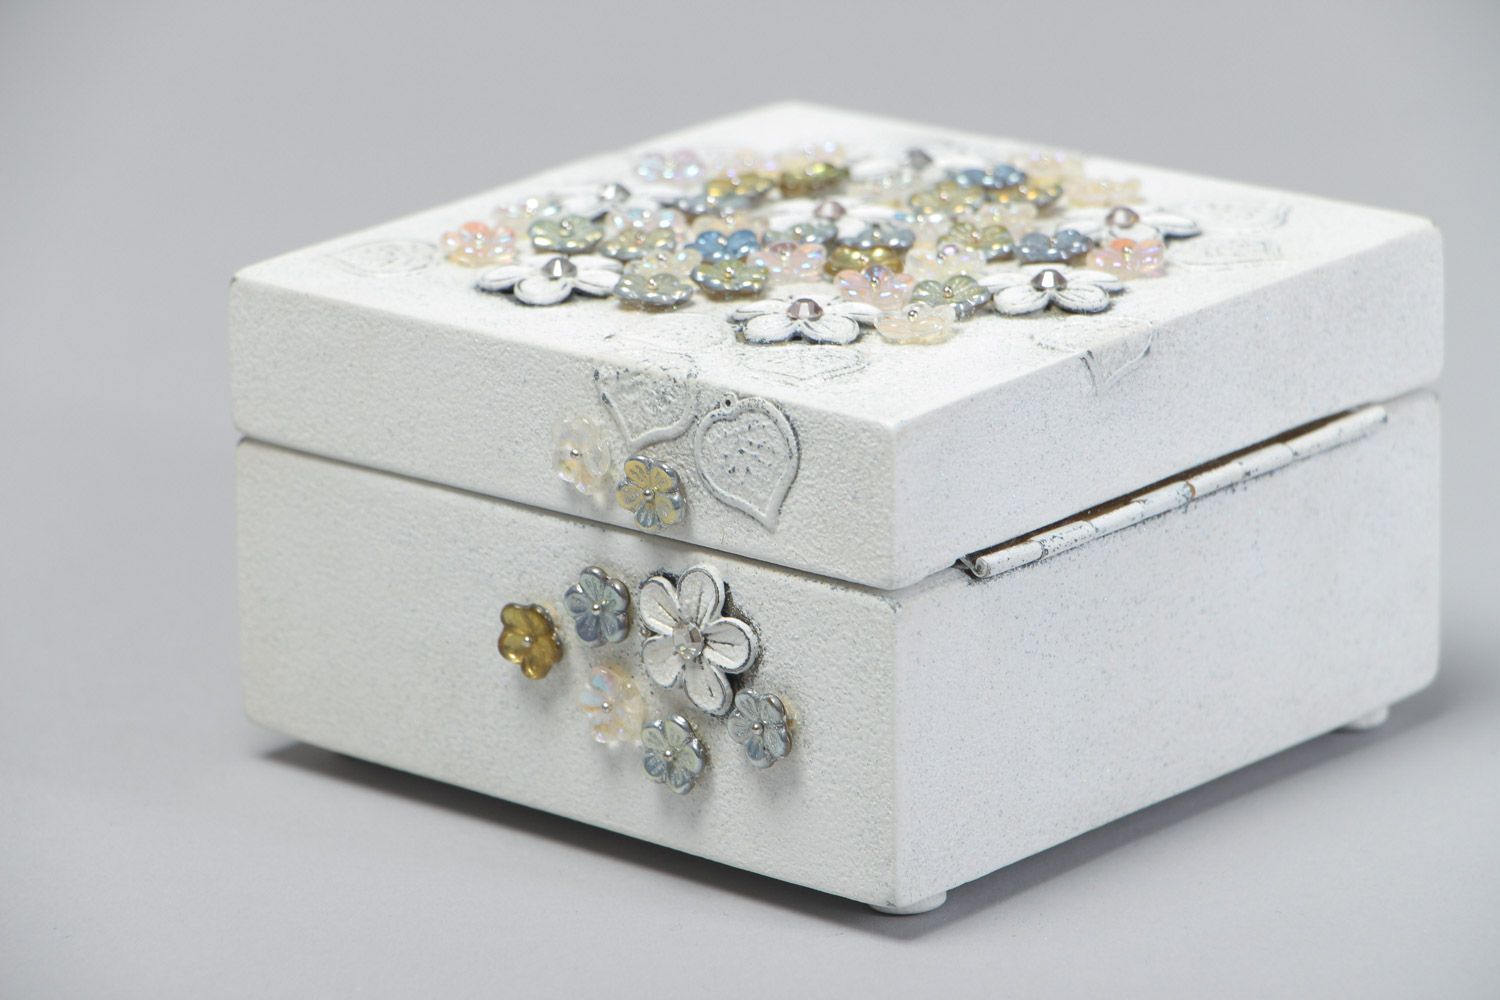 Handmade magnificent white jewelry box inlaid with glass and metal elements photo 4